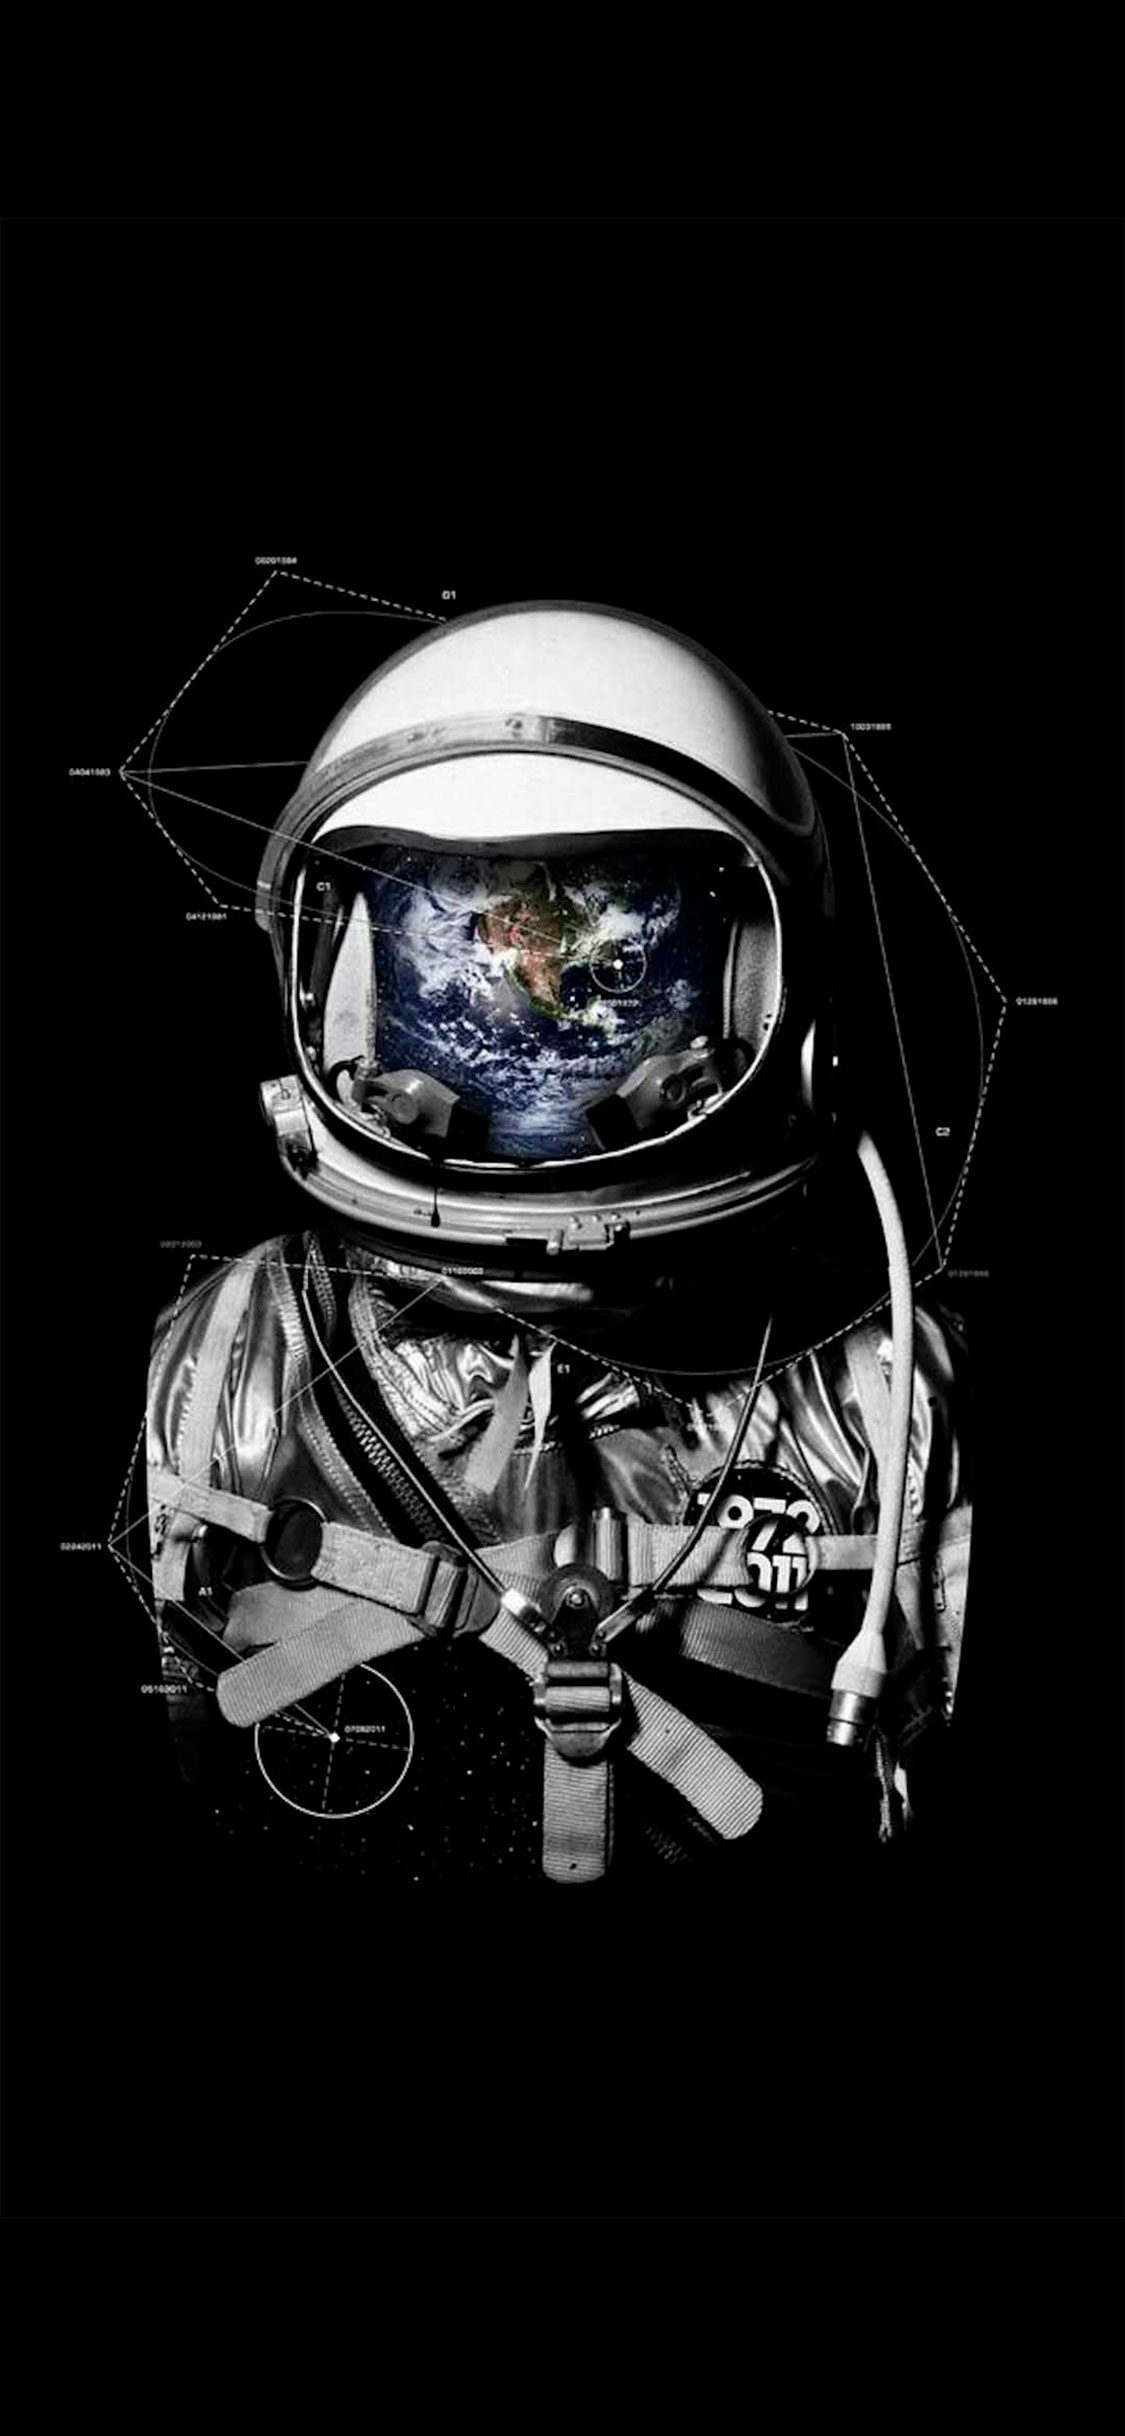 Astronaut Wallpaper For iPhone Pro Max X